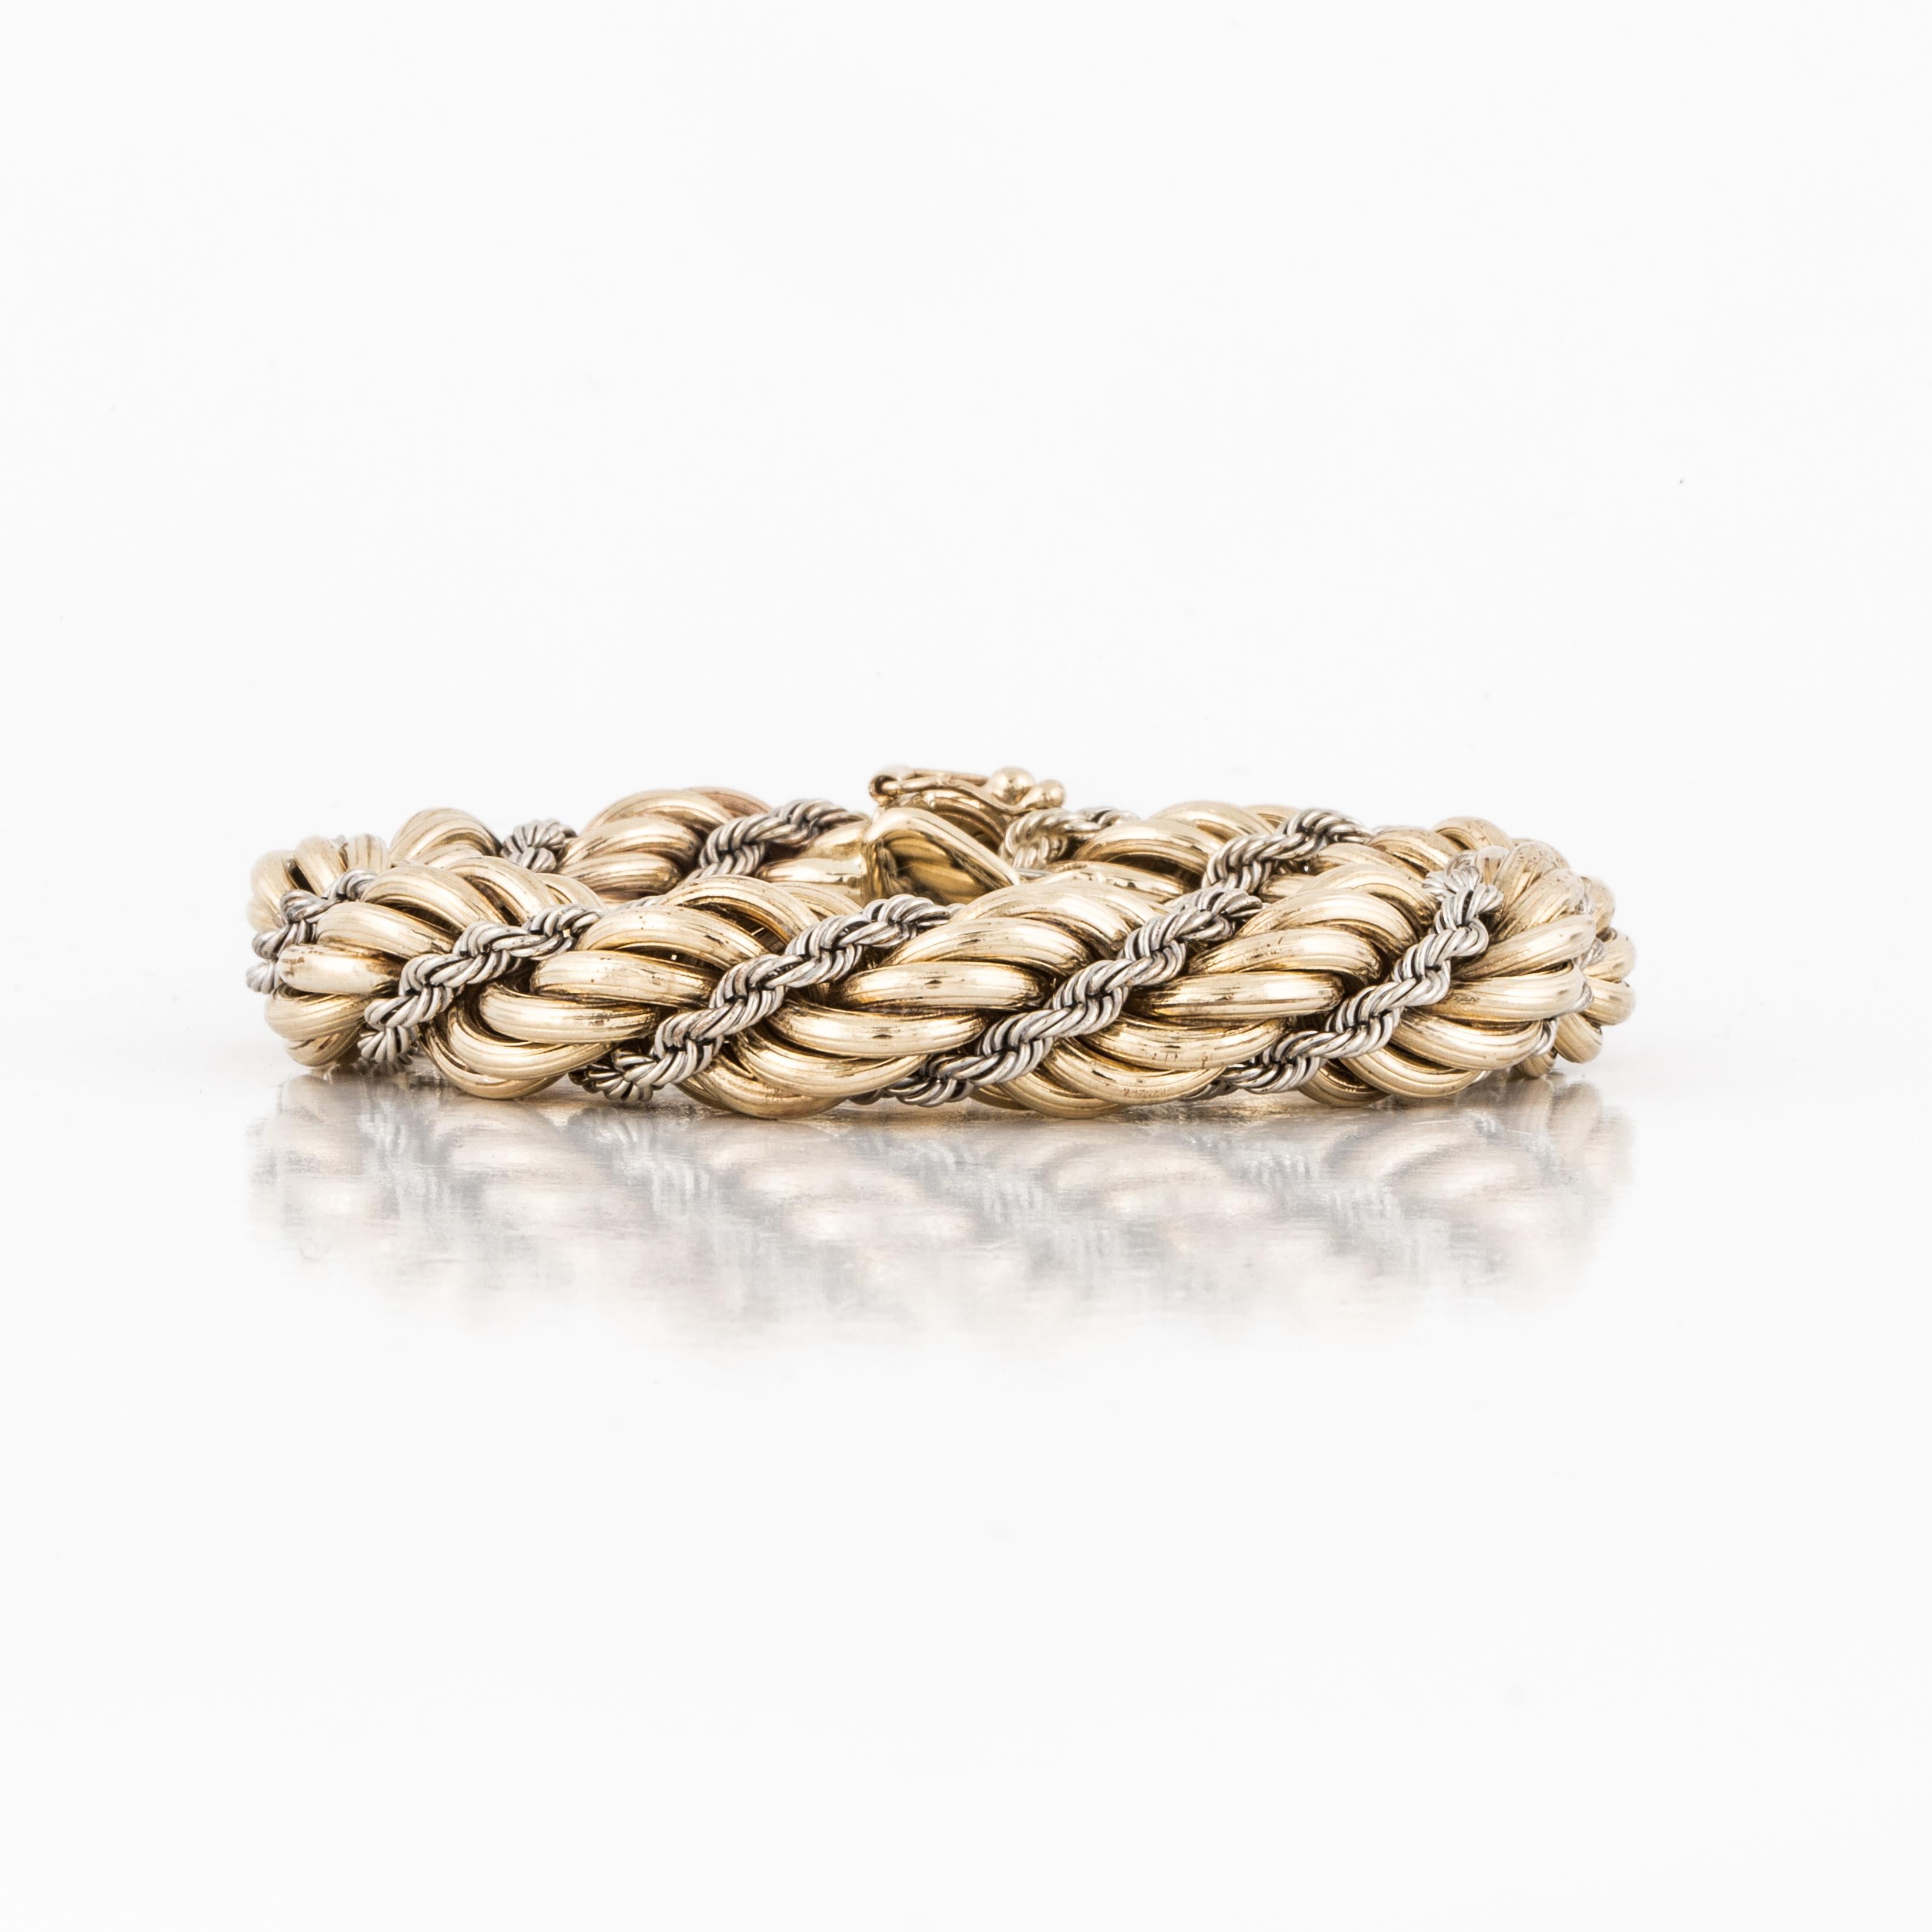 Twisted rope bracelet is marked 